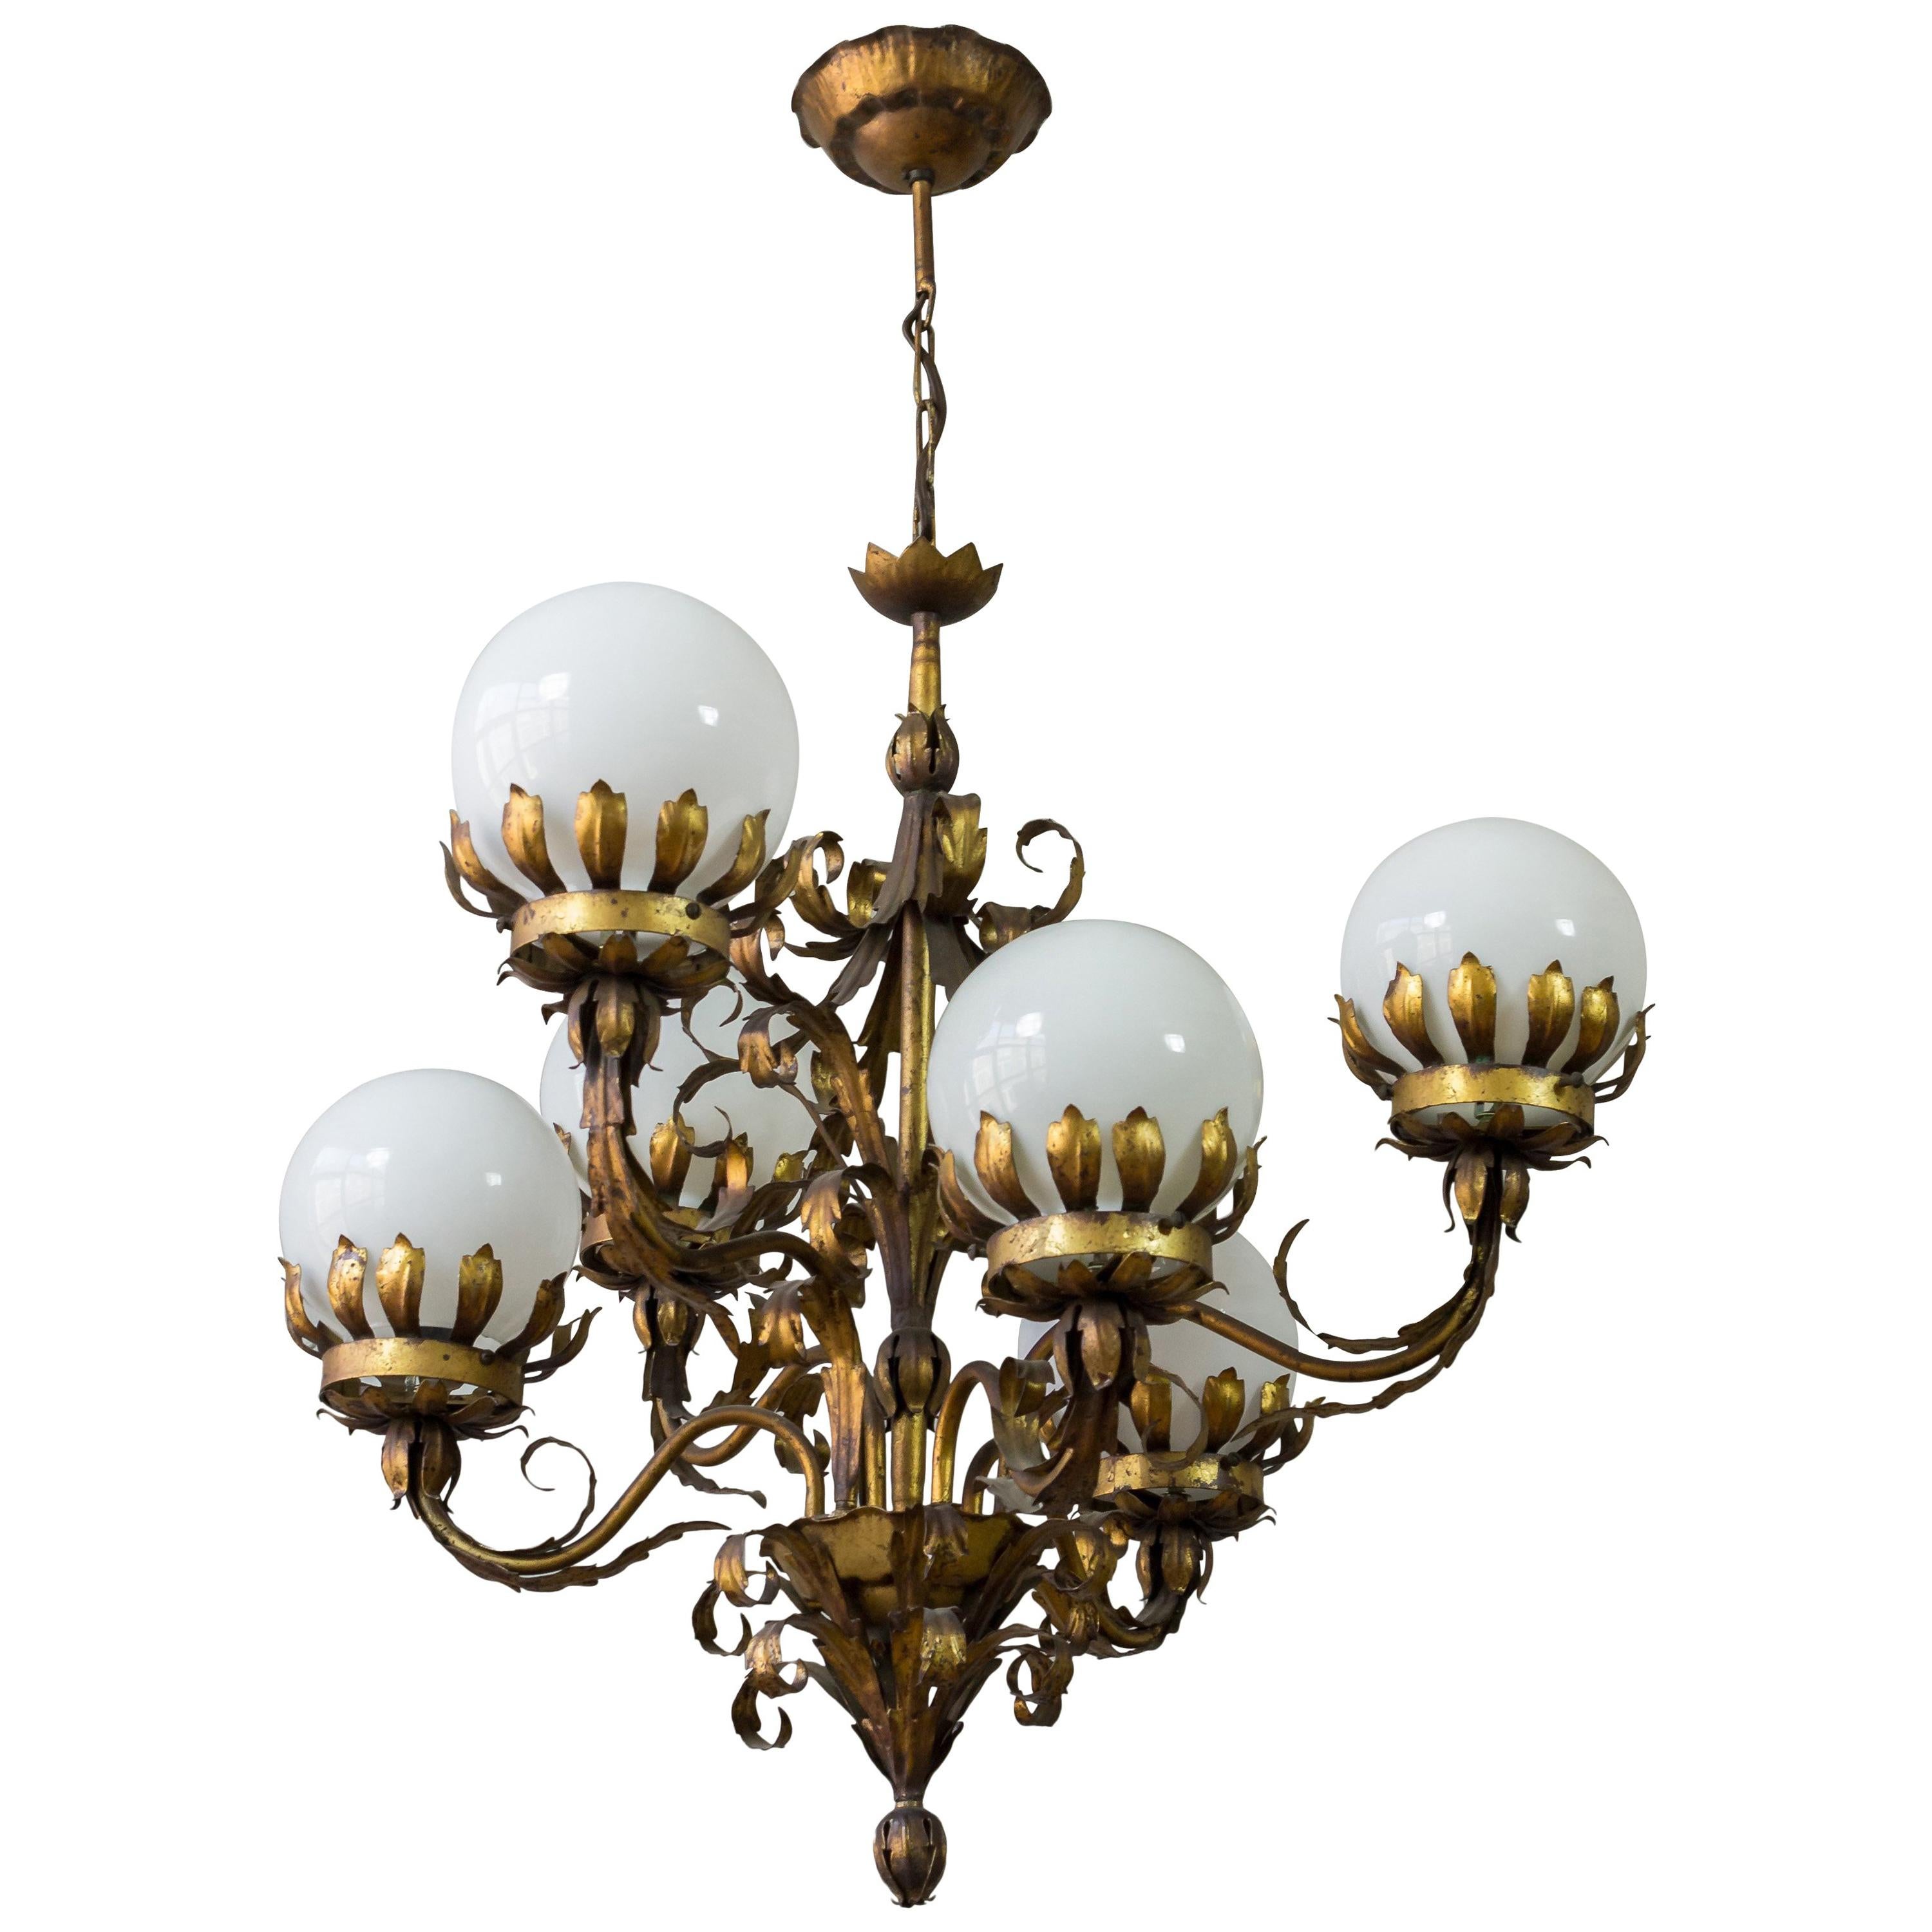 1940s Gilt Metal Chandelier with White Glass Globes